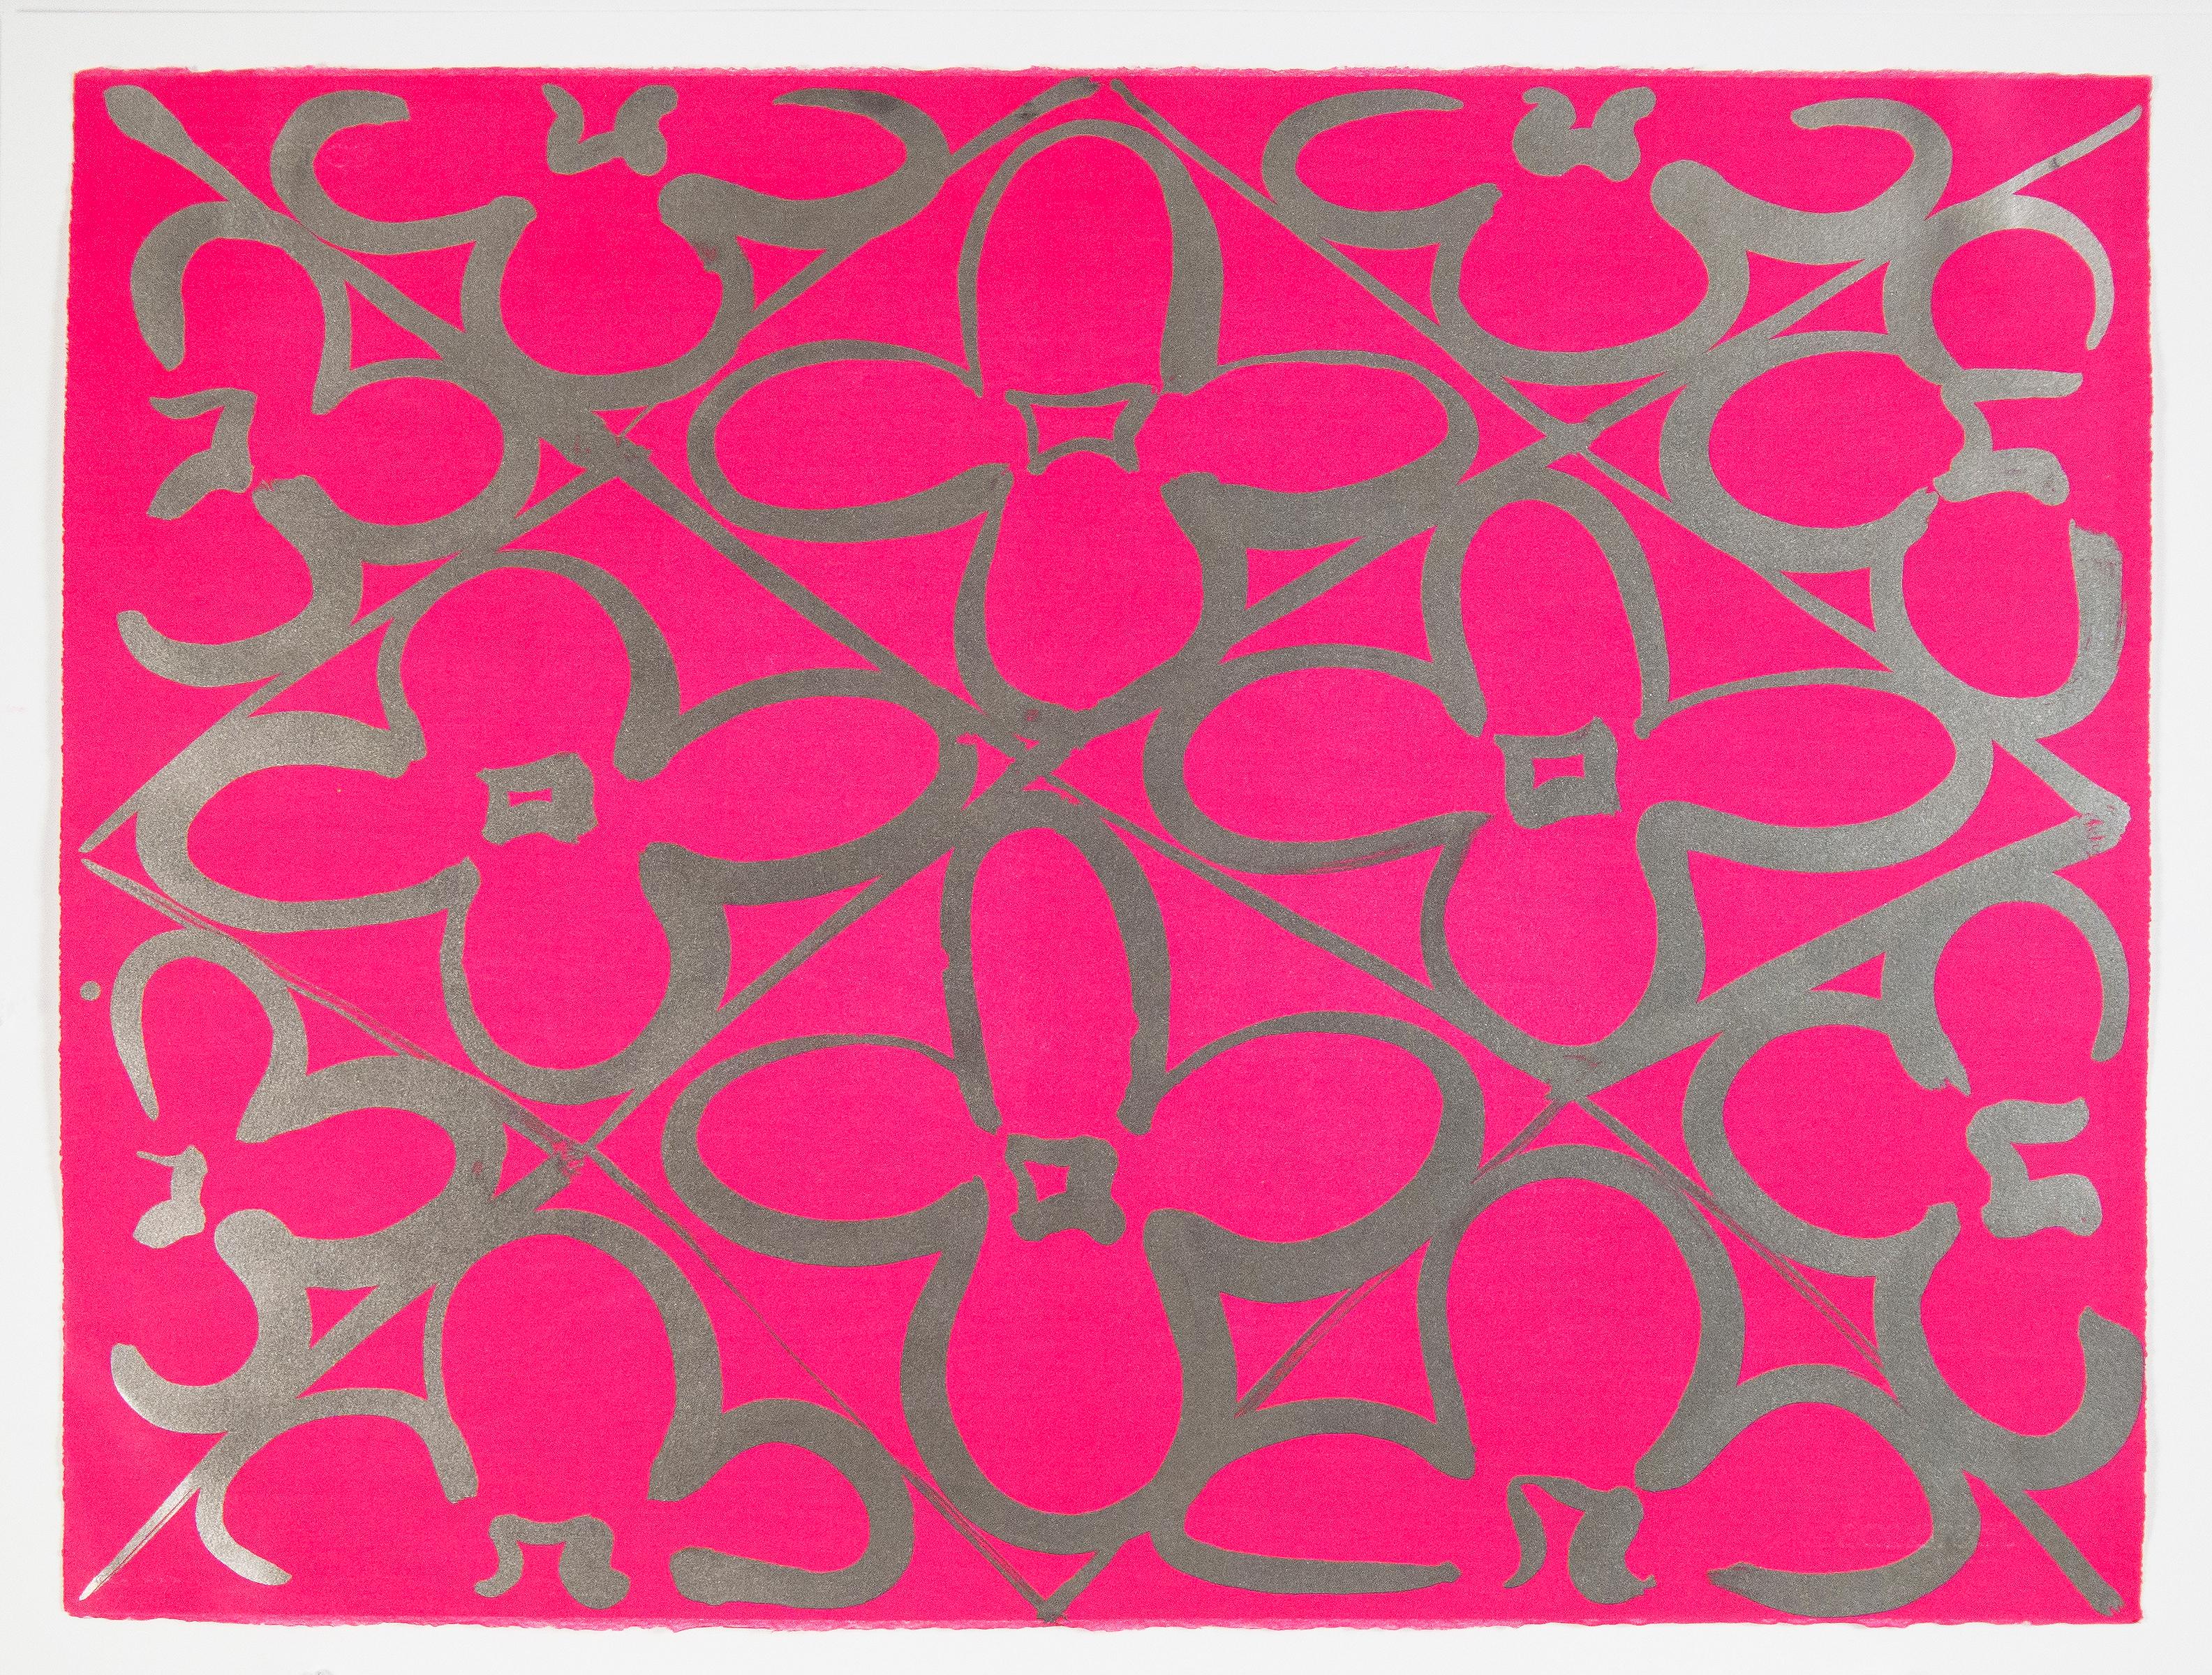 Judy Ledgerwood Abstract Print - Chromatic Patterns After the Graham Foundation - Pink